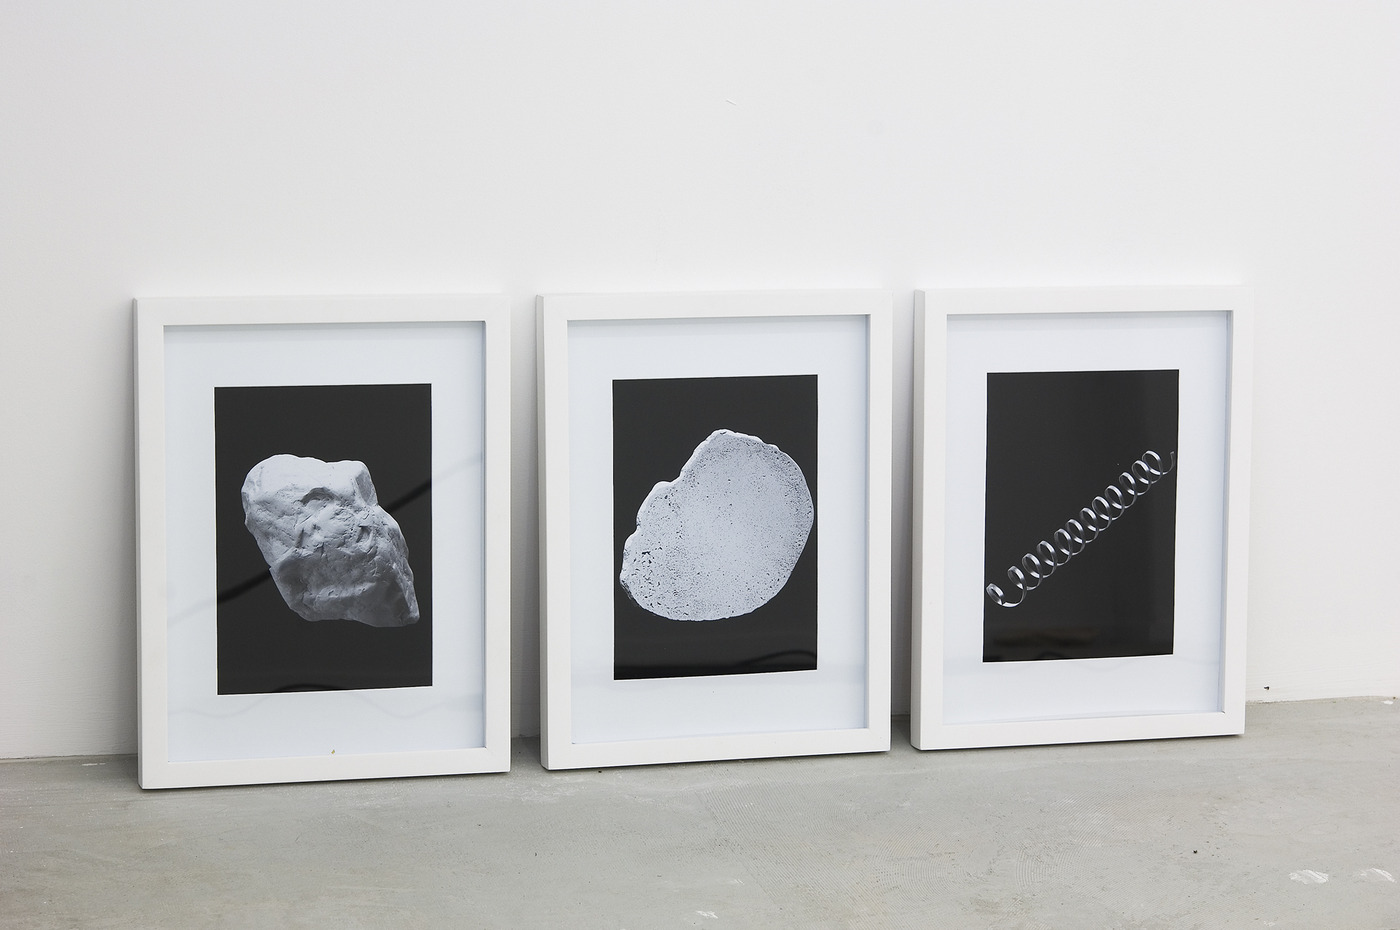 15 Katherina Heil, Stone in Orbit, 2015; Section of stone in orbit, 2015 and Device to detect stone in orbit, 2015 (from left to right)